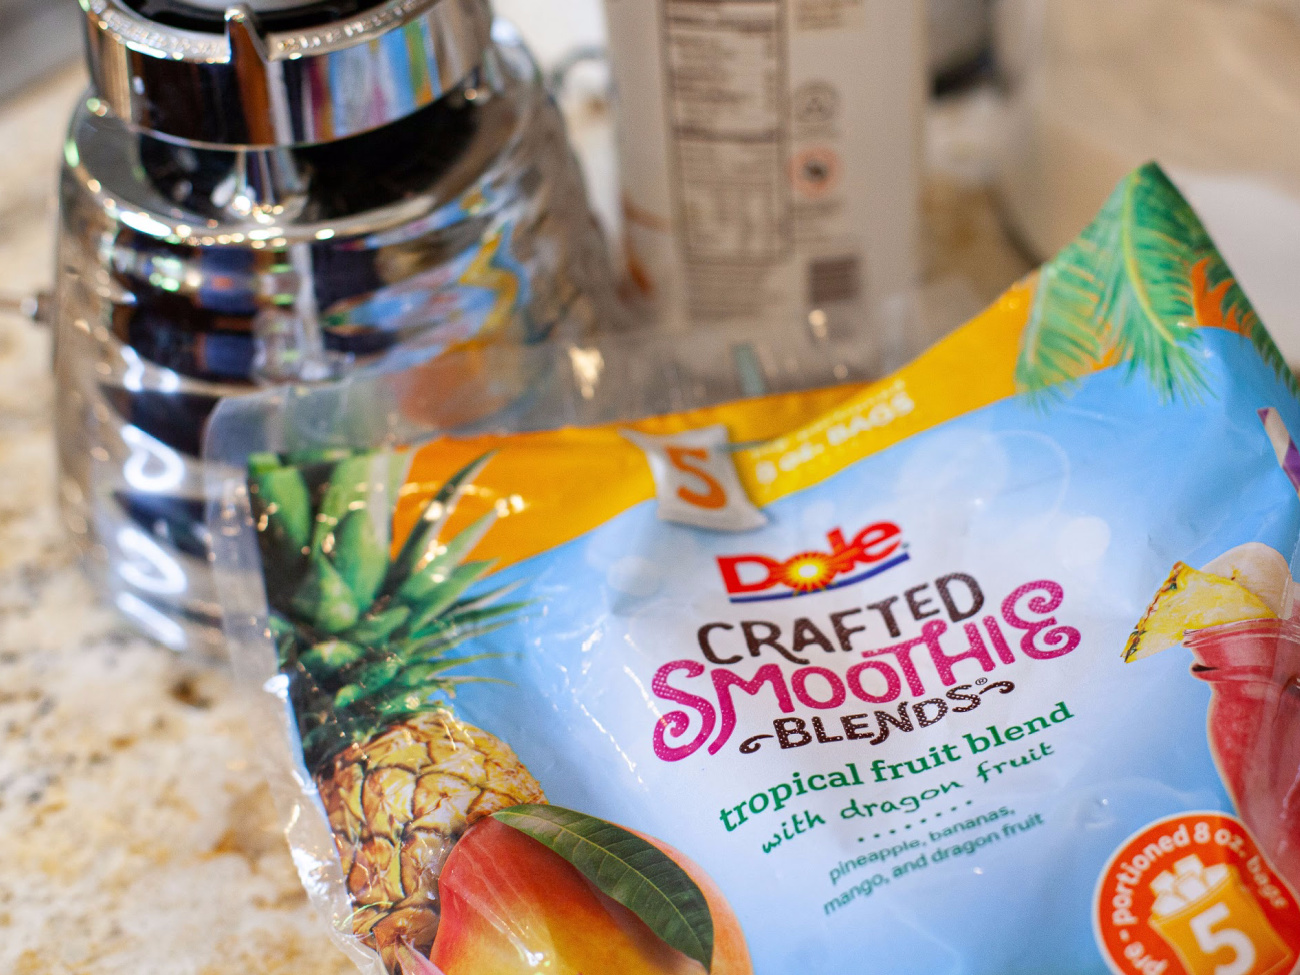 Look For Dole Crafted Smoothie Blends® On Sale NOW At Publix on I Heart Publix